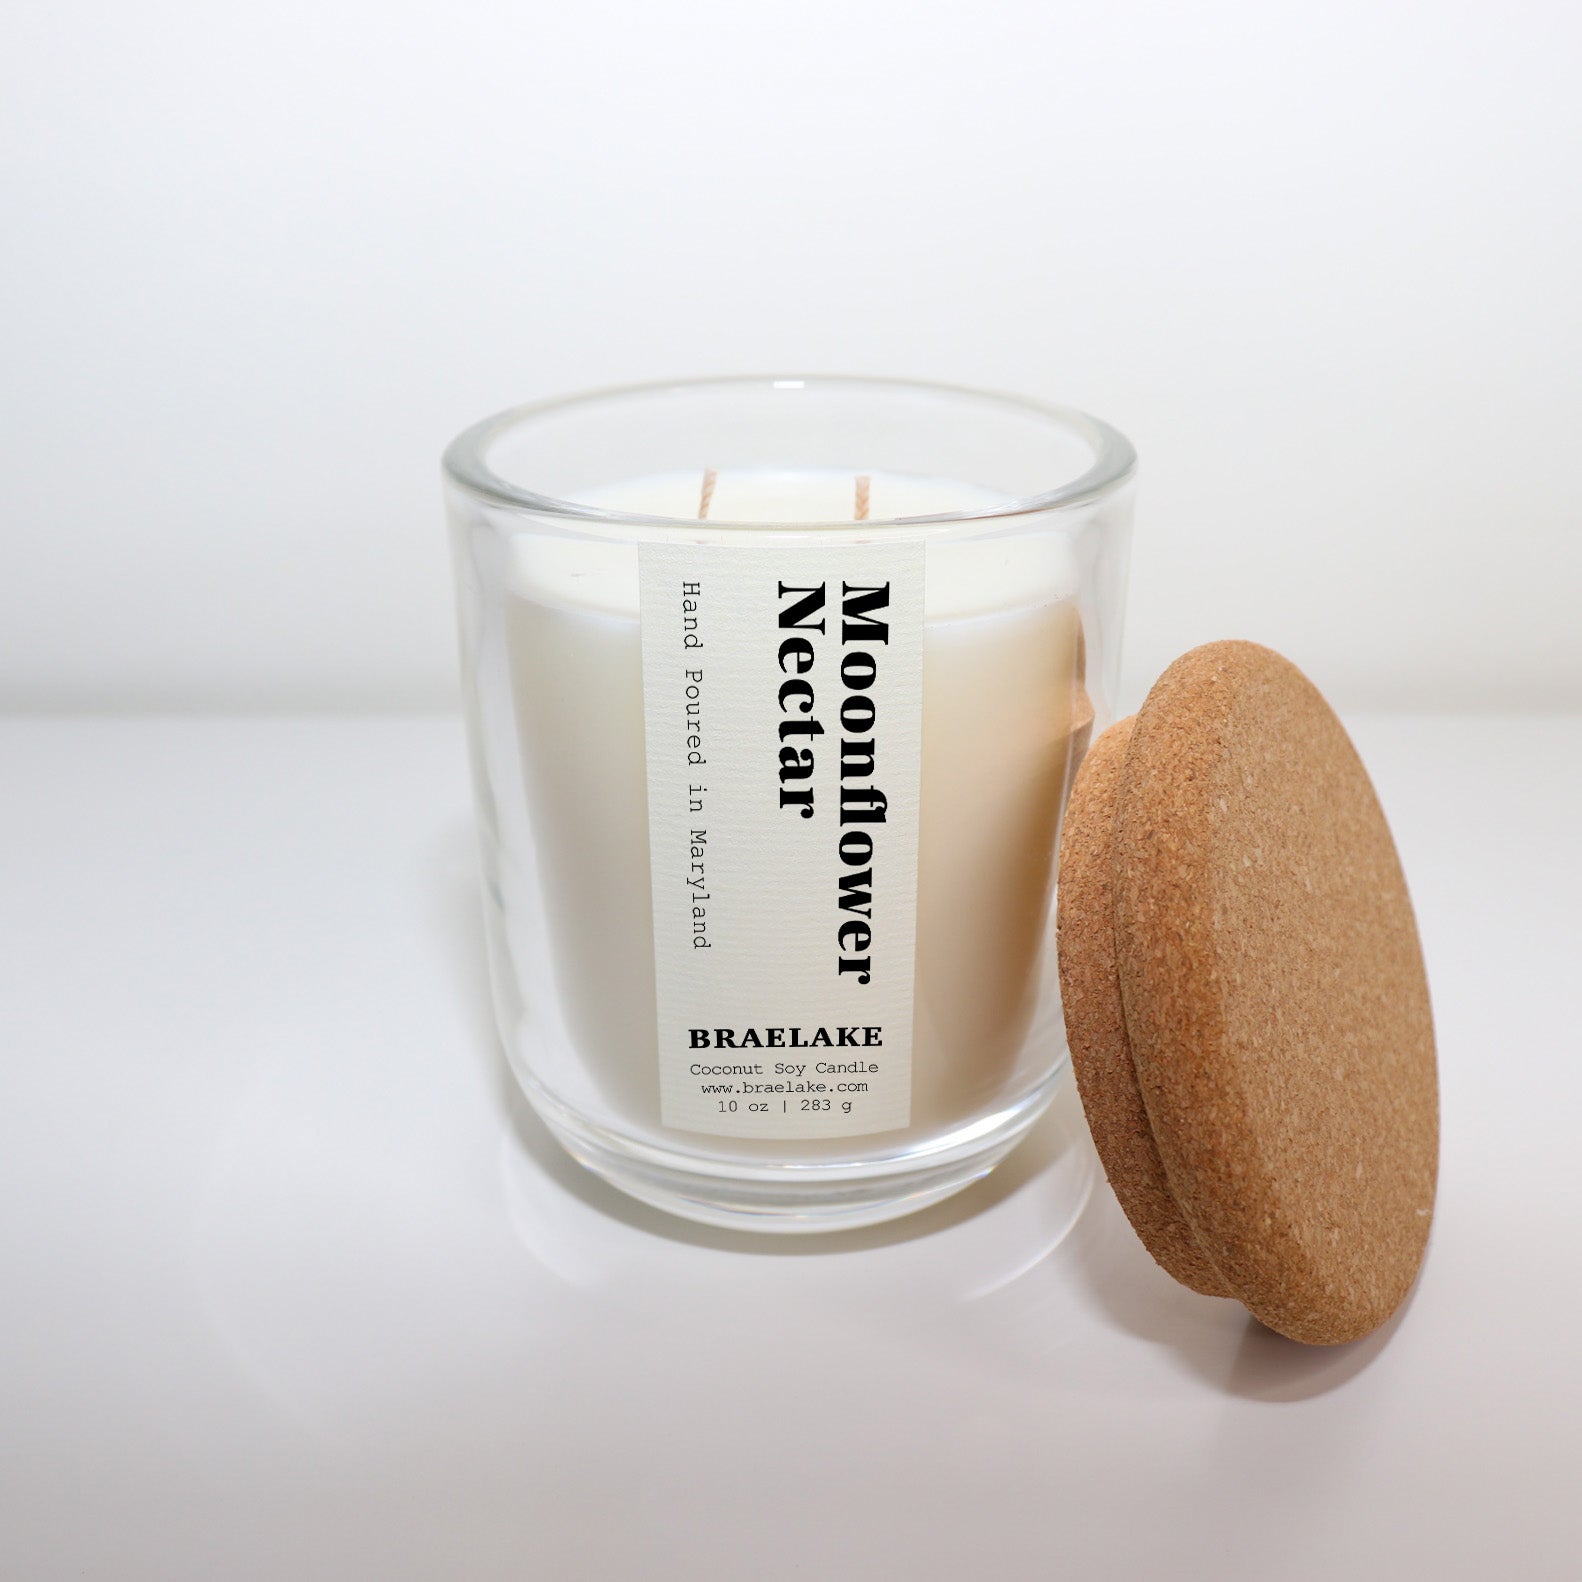 Moonflower Nectar Candle